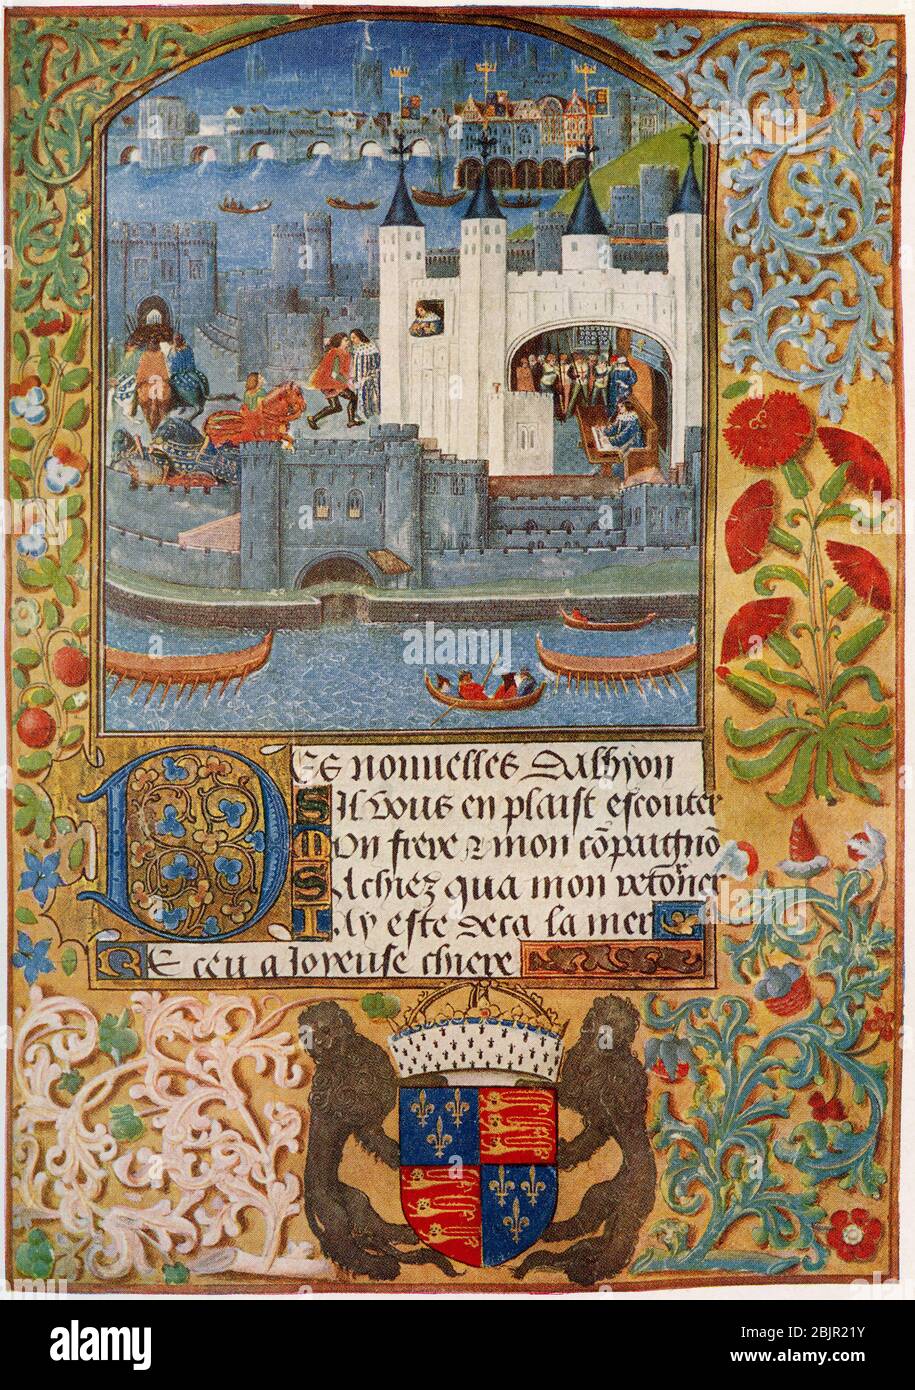 Page from an illuminated manuscript, poems of Charles, Duke of Orleans.  Flemish work of around 1500.  From Britain and Her Neighbours, 1485 - 1688, published 1923. Stock Photo